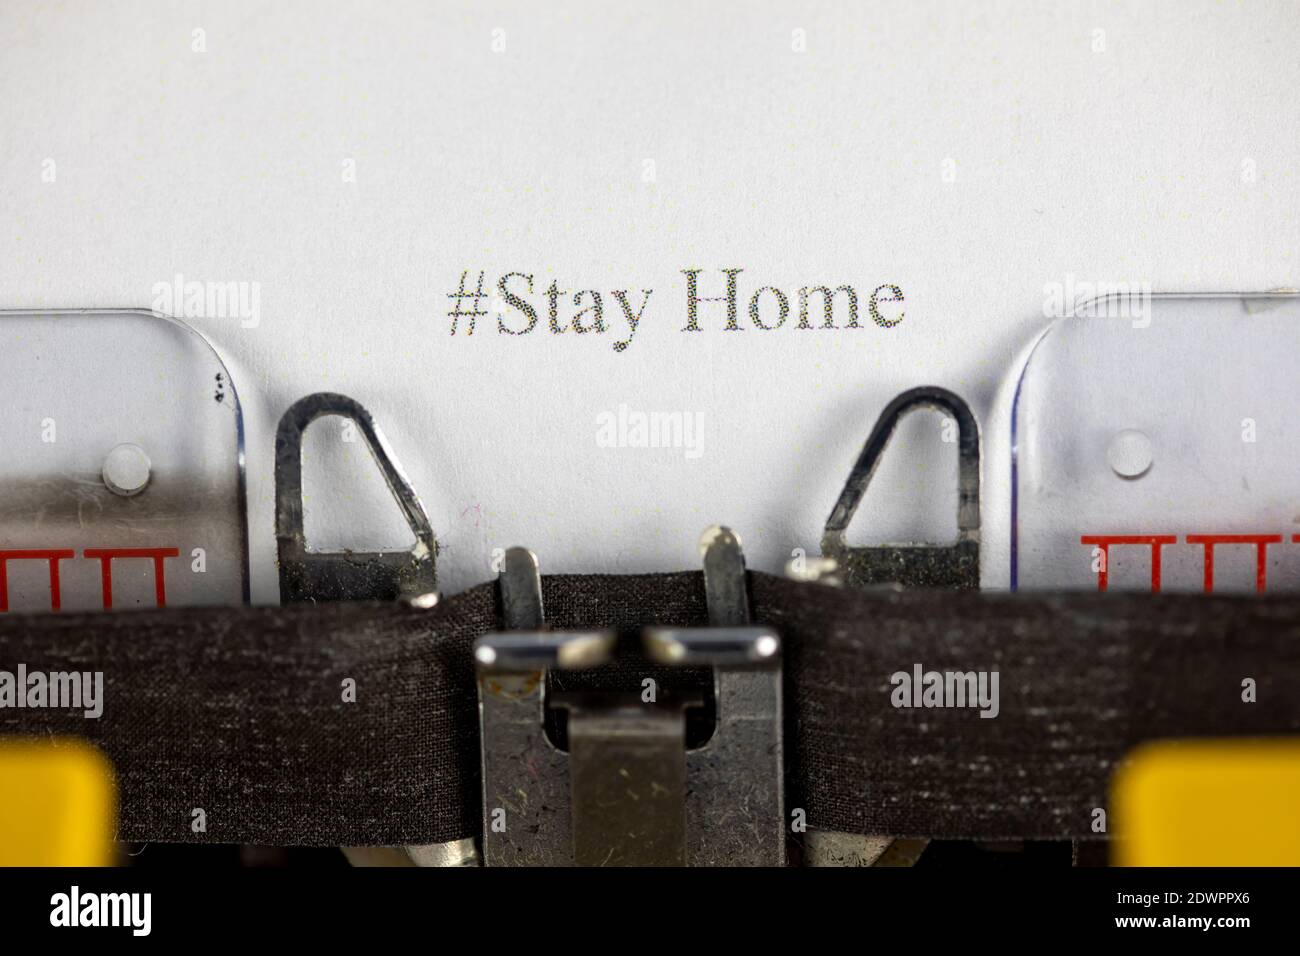 Stay Home written on an old typewriter Stock Photo